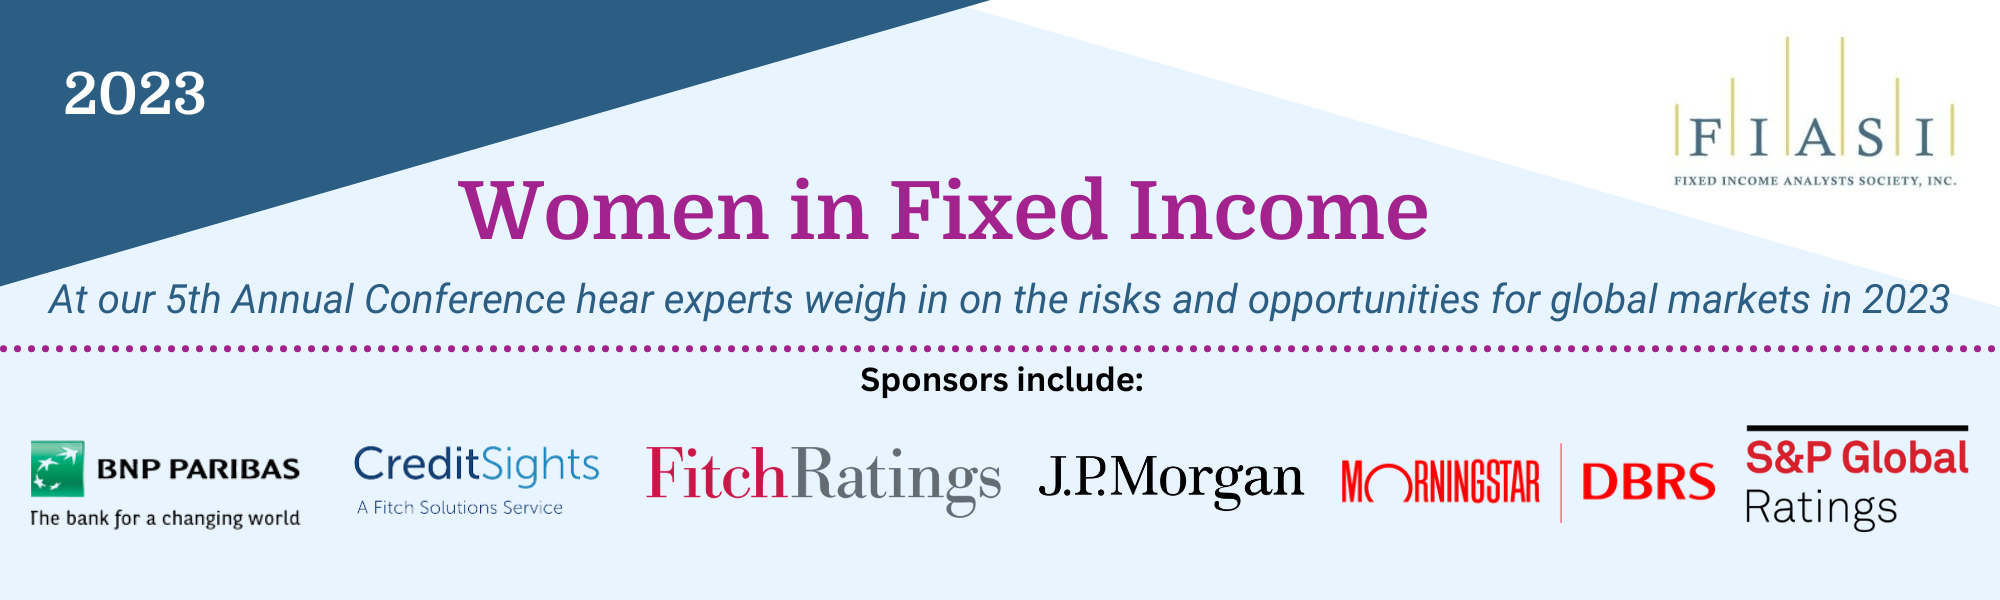 2023 FIASI Women in Fixed Income w SP